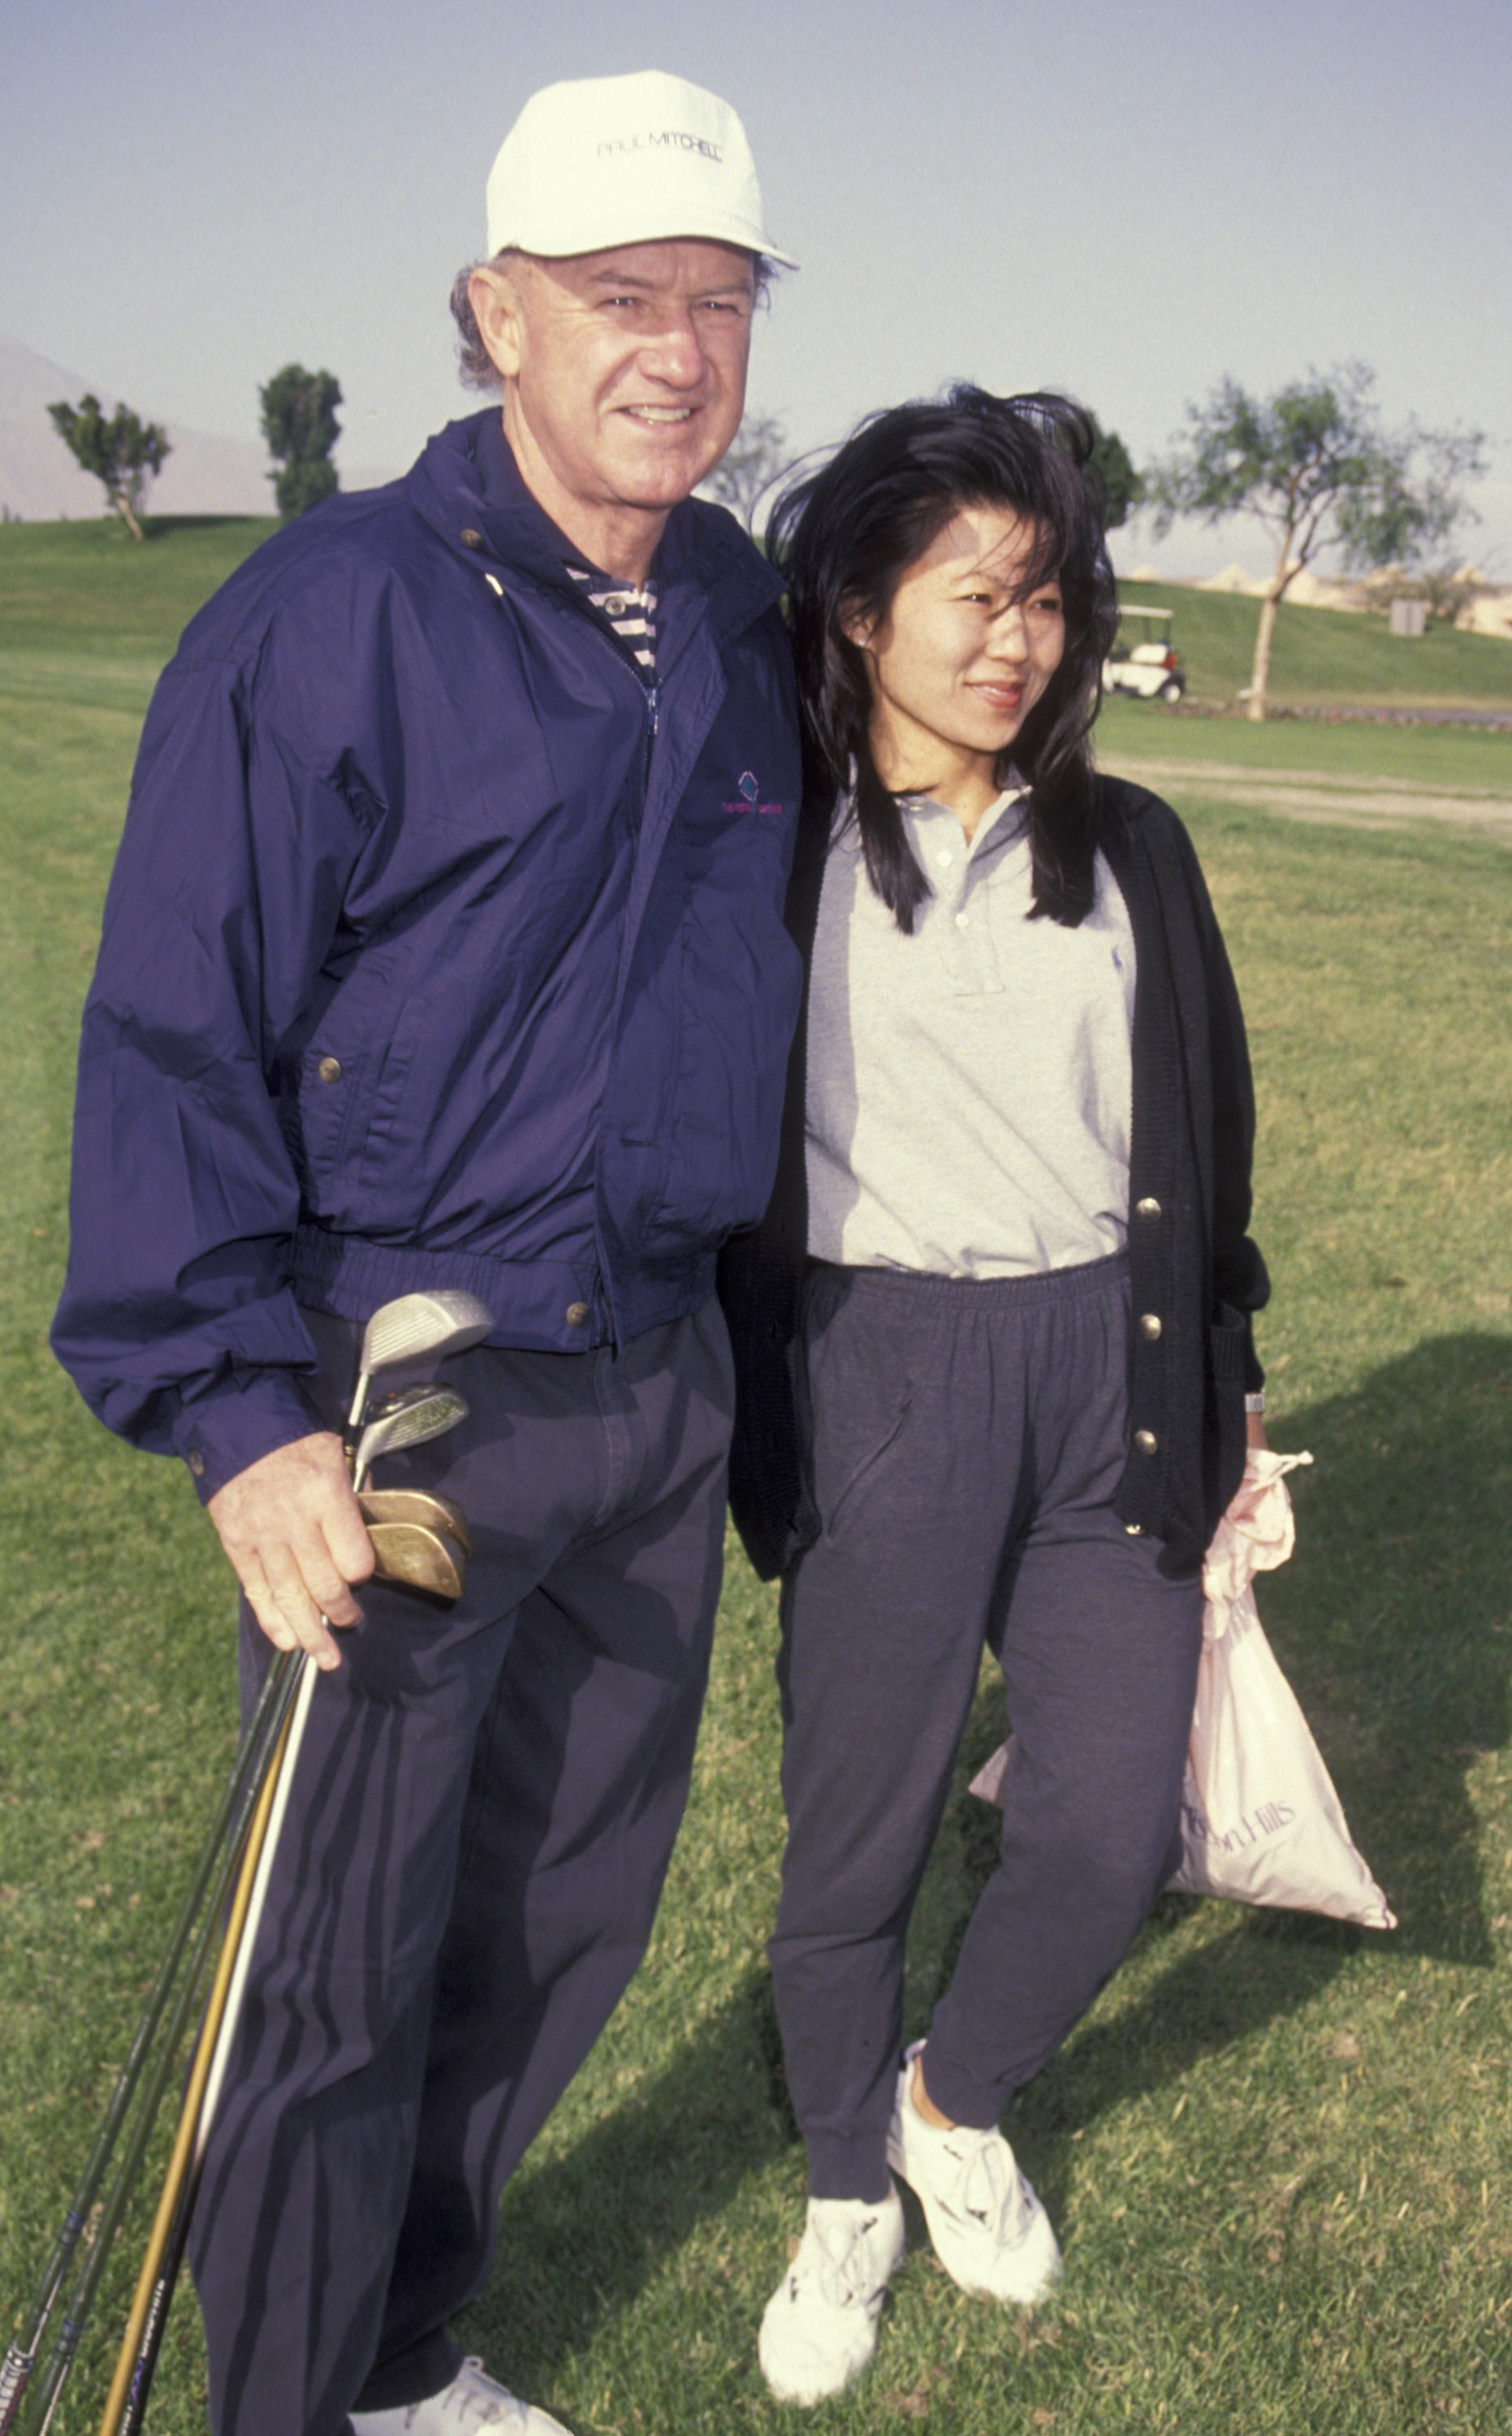 Gene Hackman and Betsy Arakawa at the Mission Hills Pro-Celebrity Sports Invitational on November 30, 1991 | Source: Getty Images